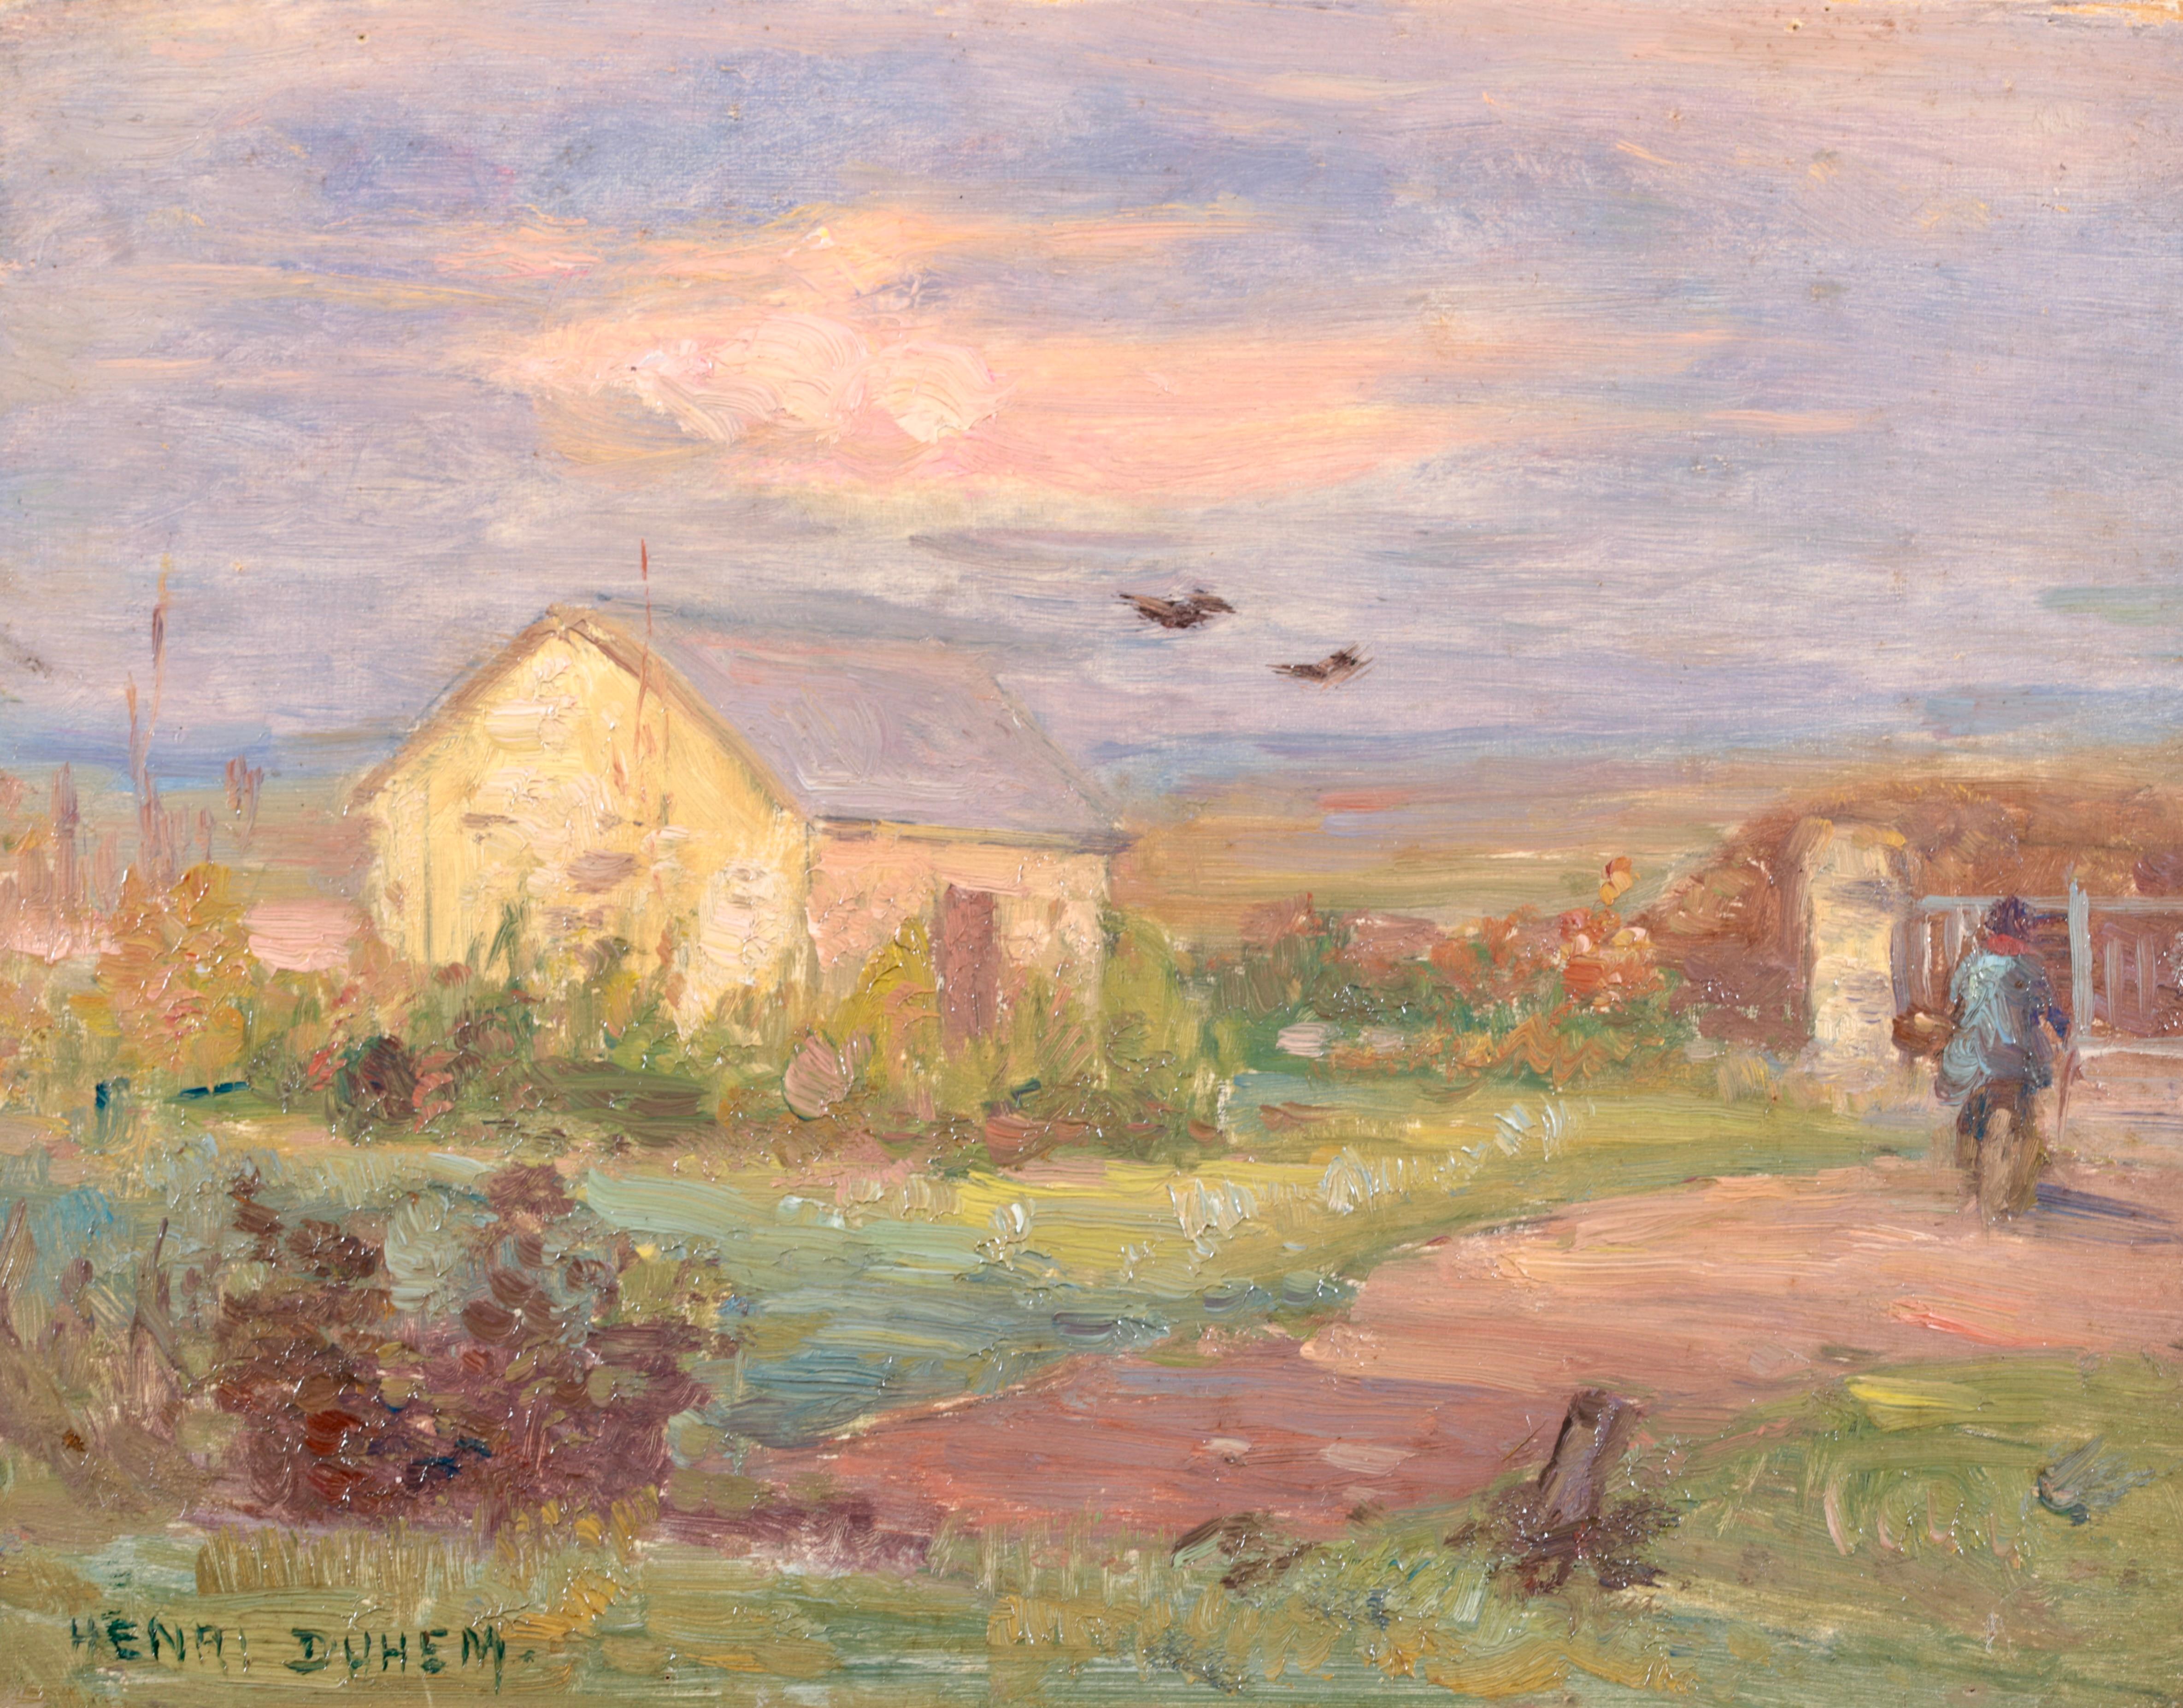 Signed and dated oil on panel figure in landscape by French impressionist painter Henri Duhem. The work depicts a man in a blue jacket walking along a path beside a small farm building. Birds fly overhead and rolling fields can be seen on the